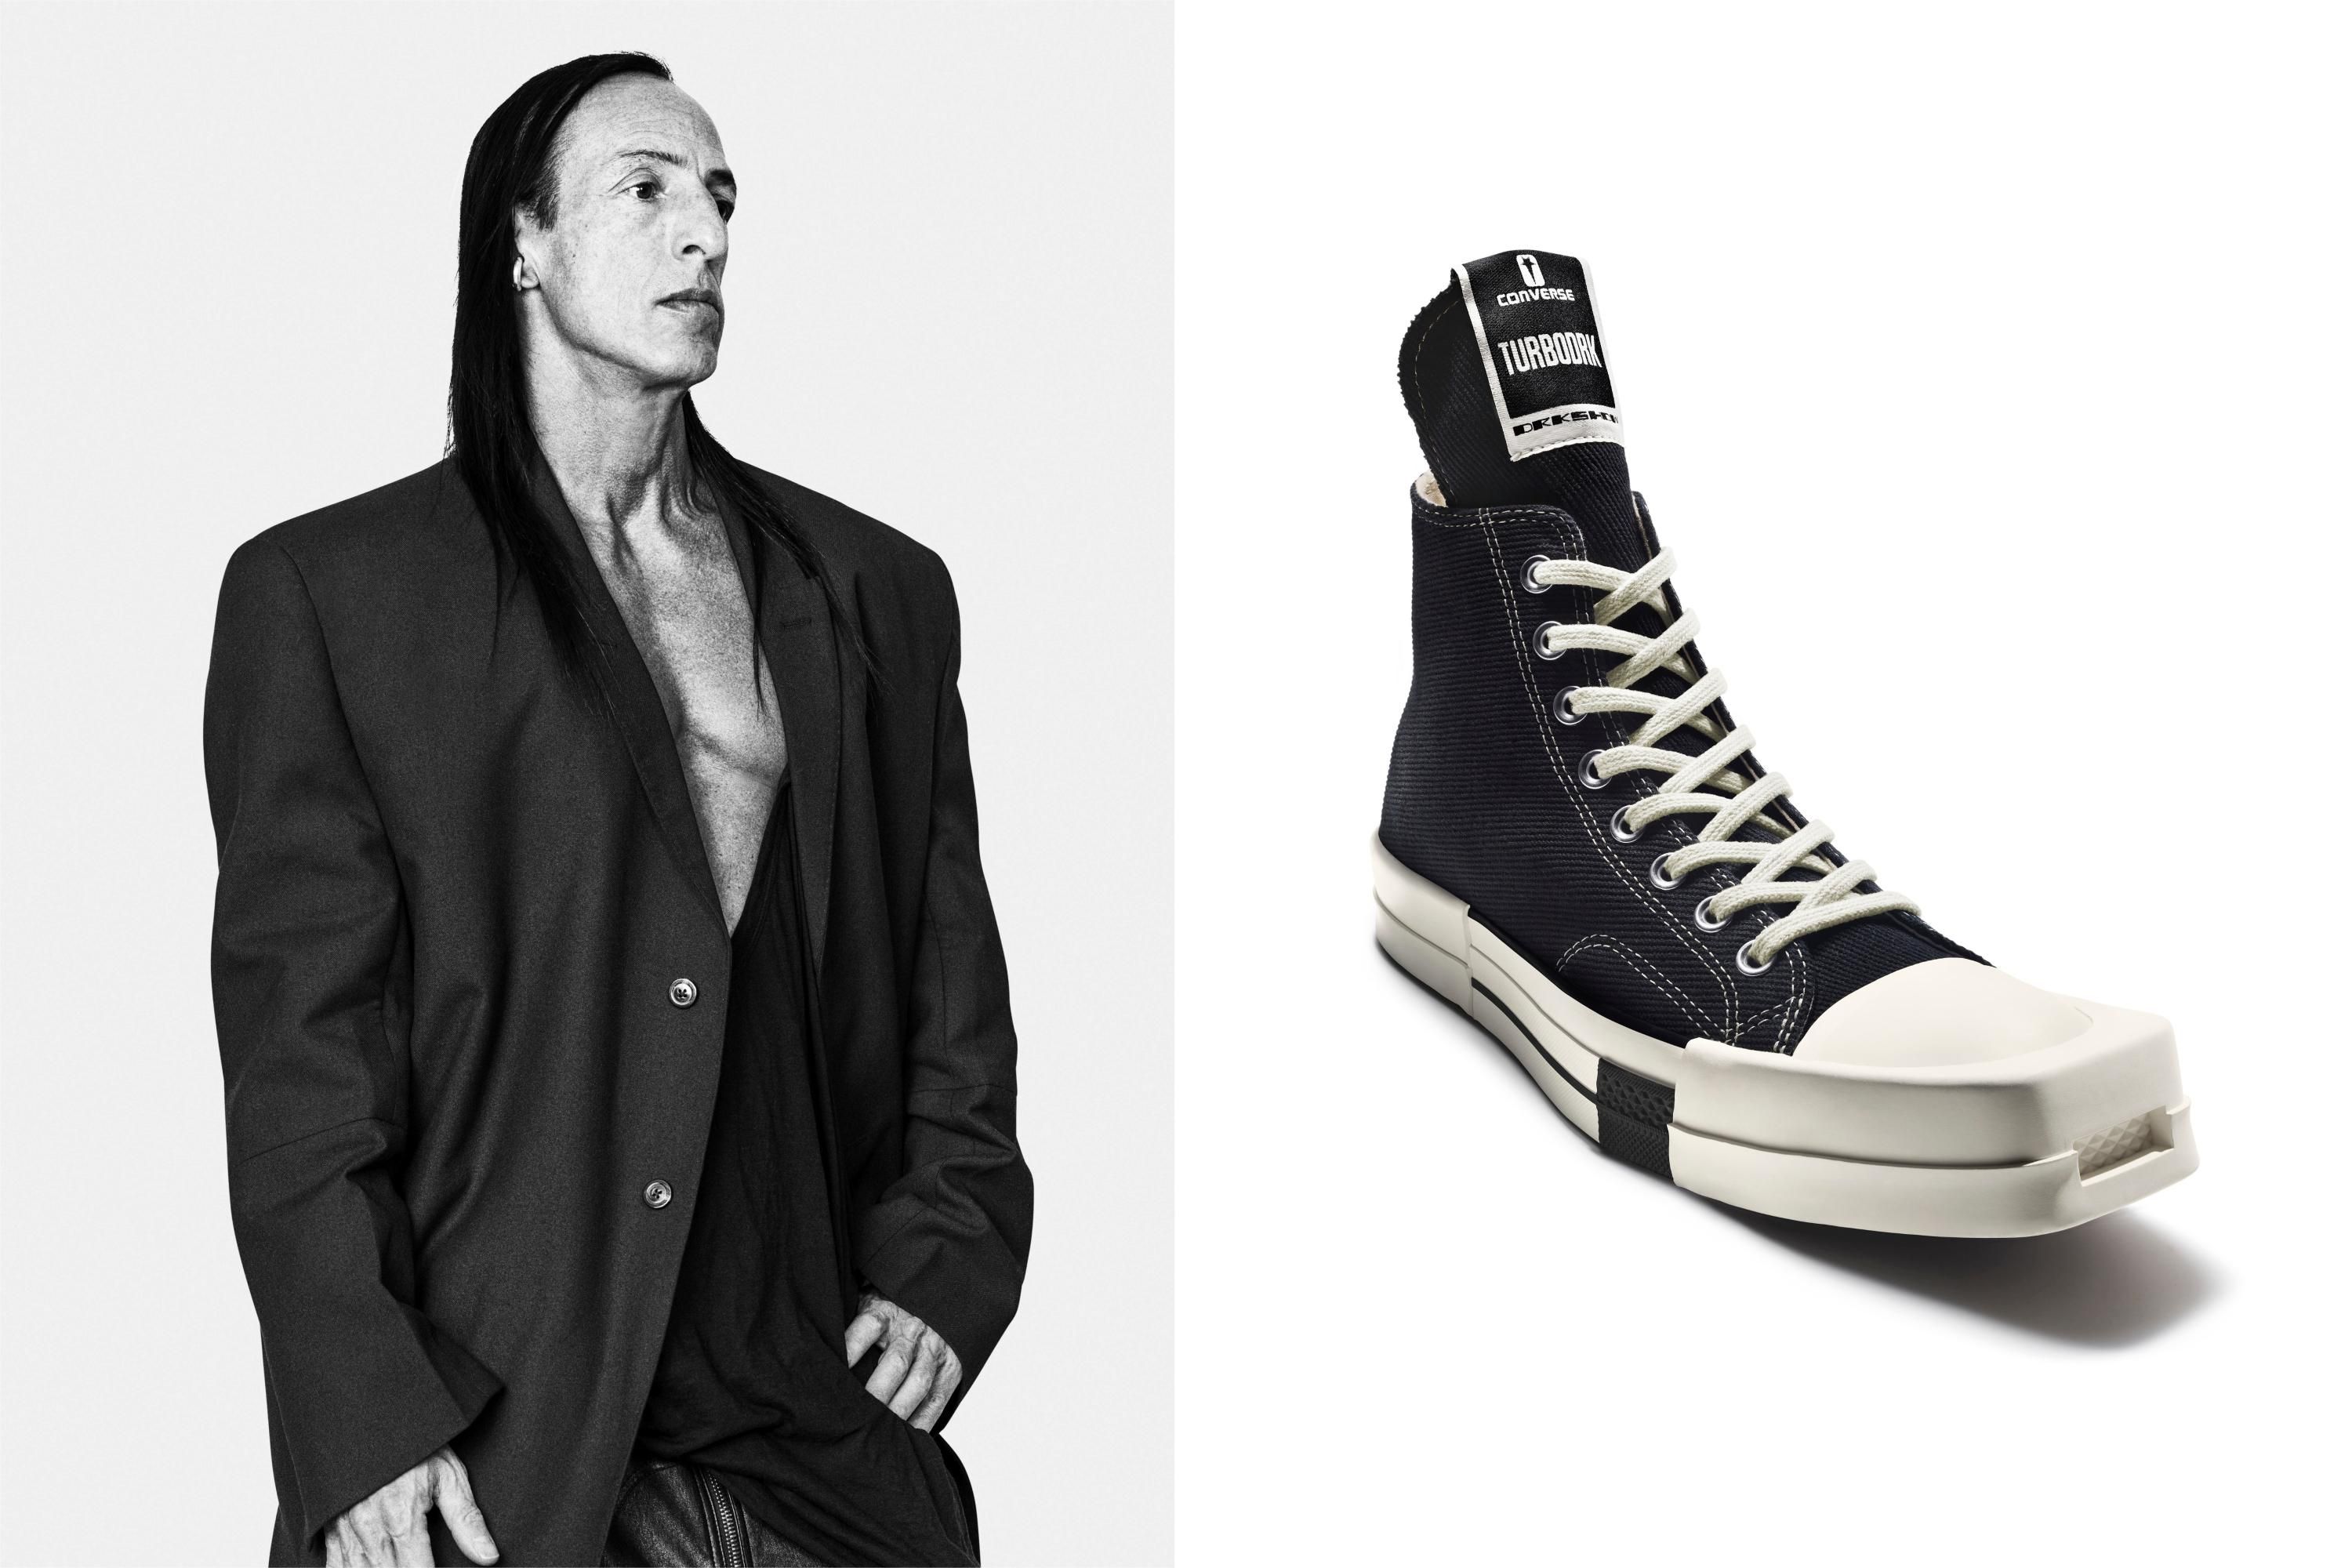 Rick Owens and Converse Team Up on DRKSHDW Collaboration